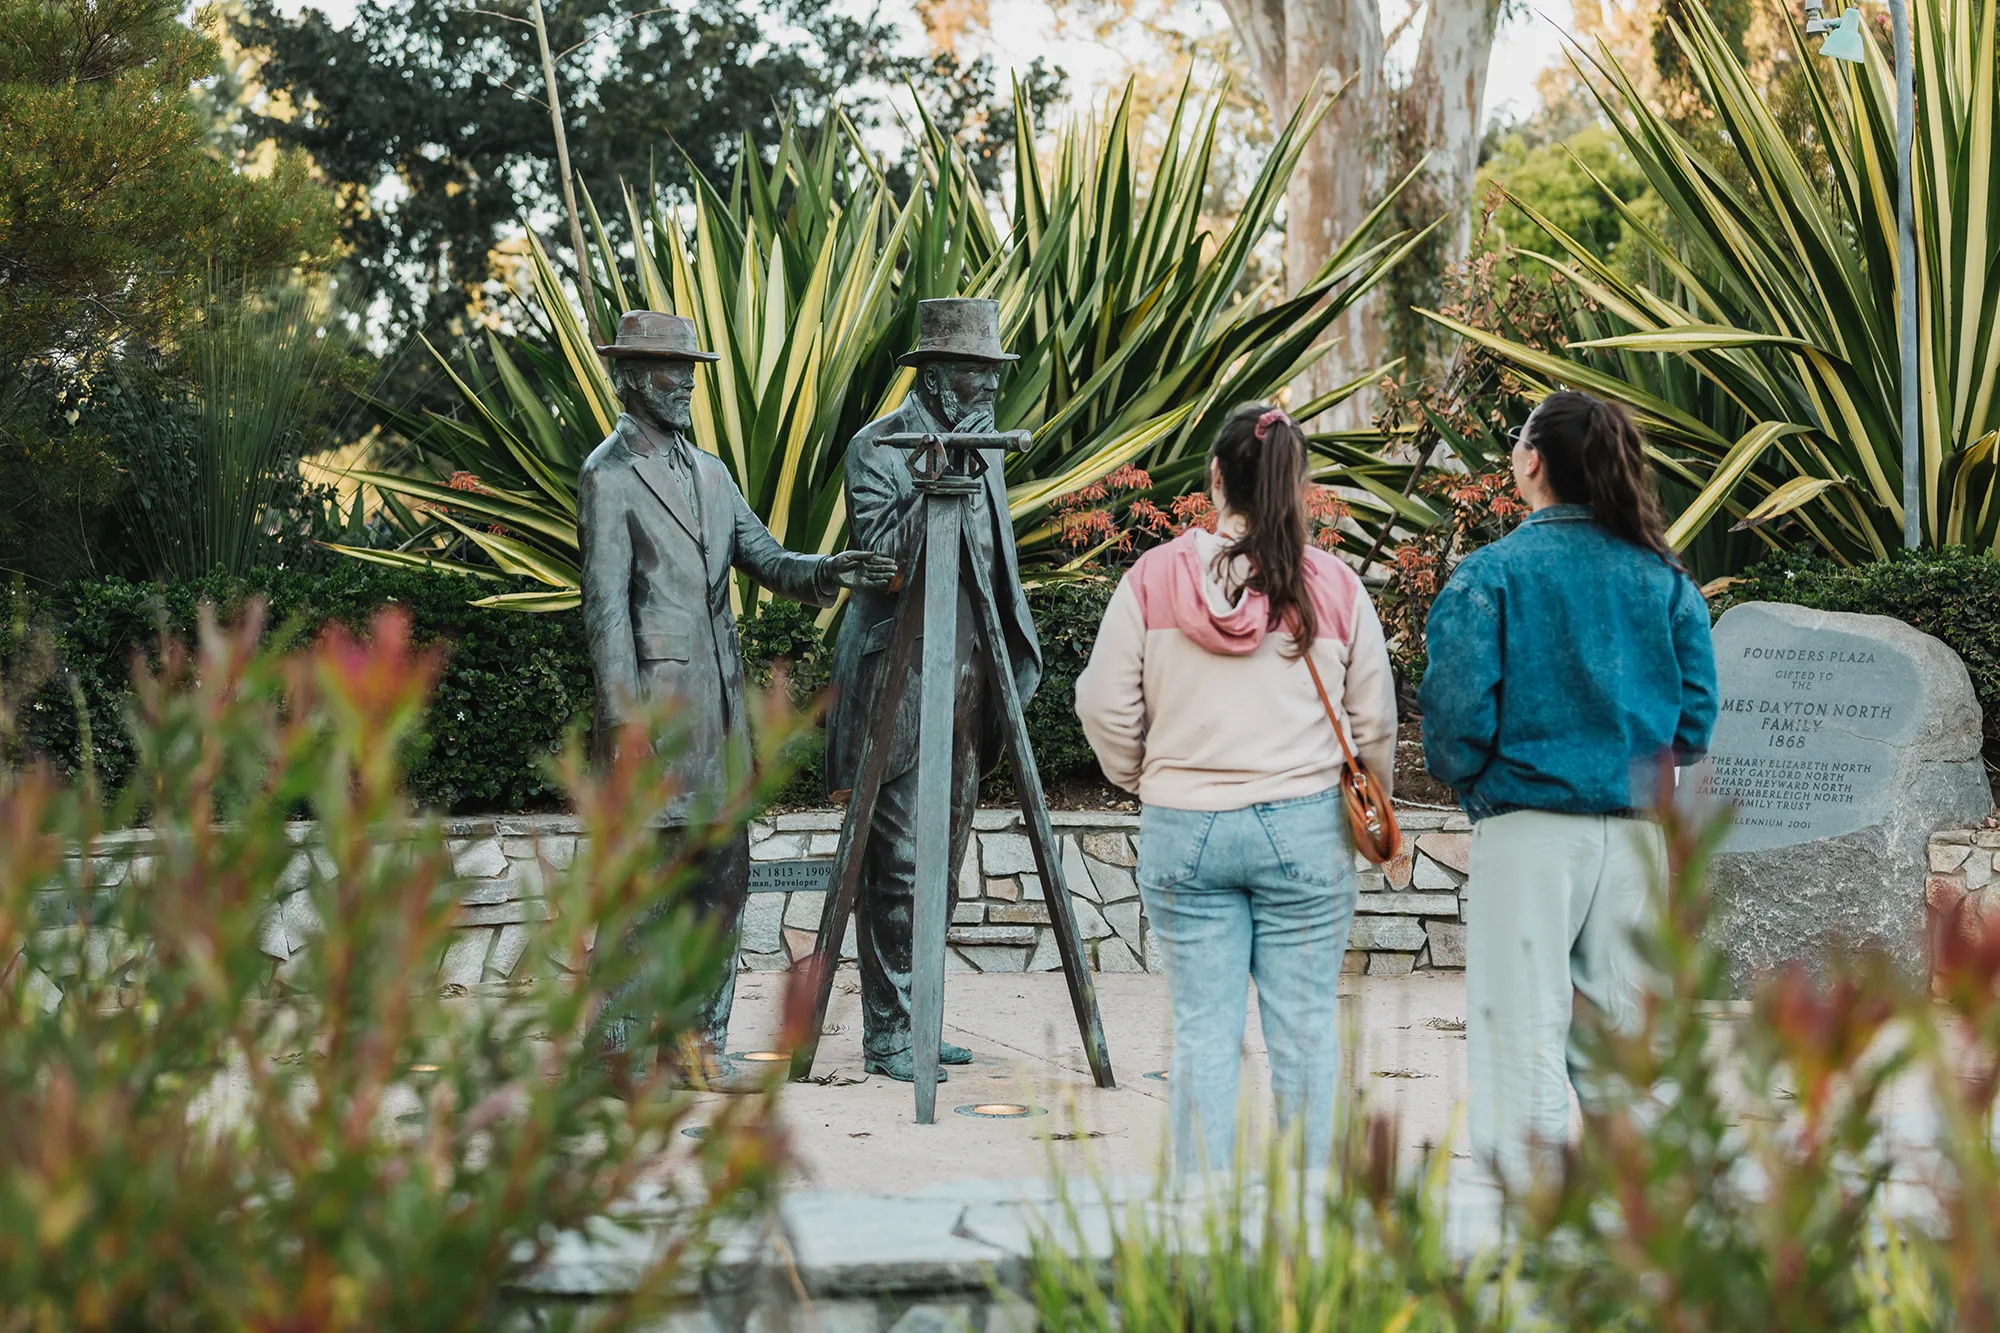 Two people looking two statues in Sefton Plaza in Balboa Park.